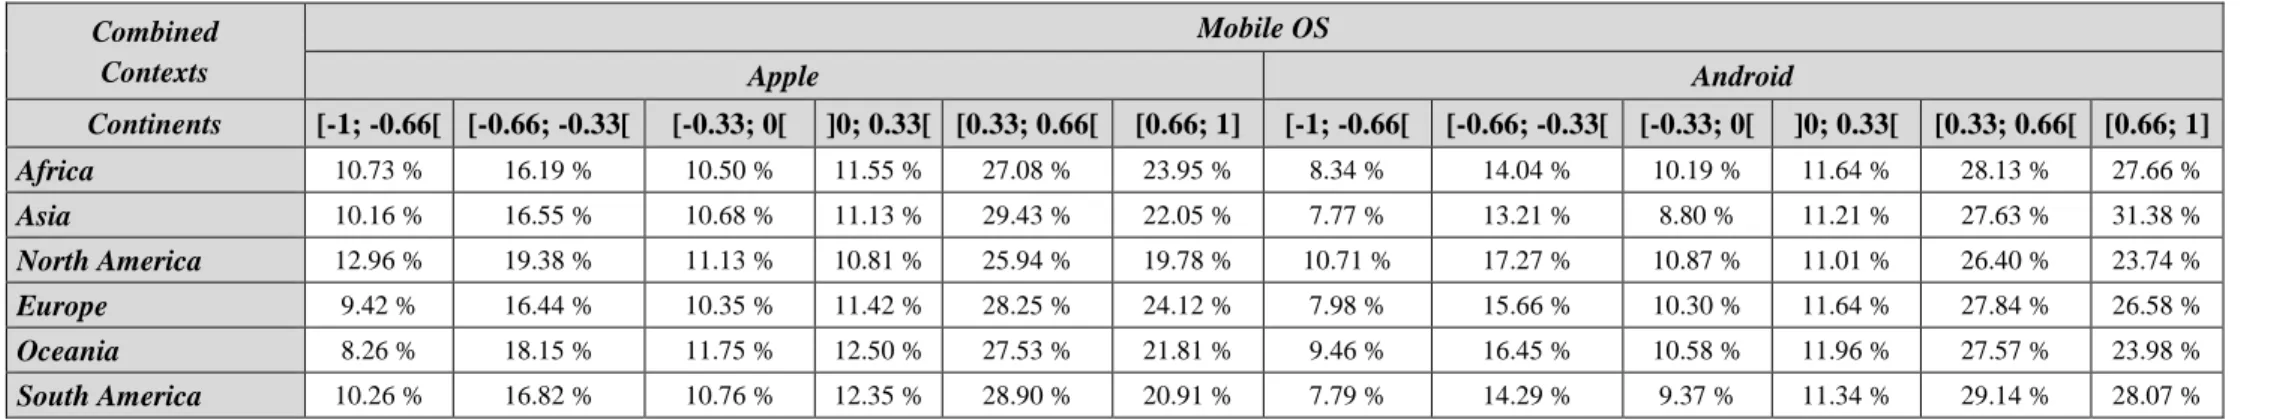 Table 5: Proportions sentiment intervals for the combinations of continents and mobile devices’ OS Combined  Contexts  Mobile OS  Apple  Android  Continents  [-1; -0.66[  [-0.66; -0.33[  [-0.33; 0[  ]0; 0.33[  [0.33; 0.66[  [0.66; 1]  [-1; -0.66[  [-0.66; 